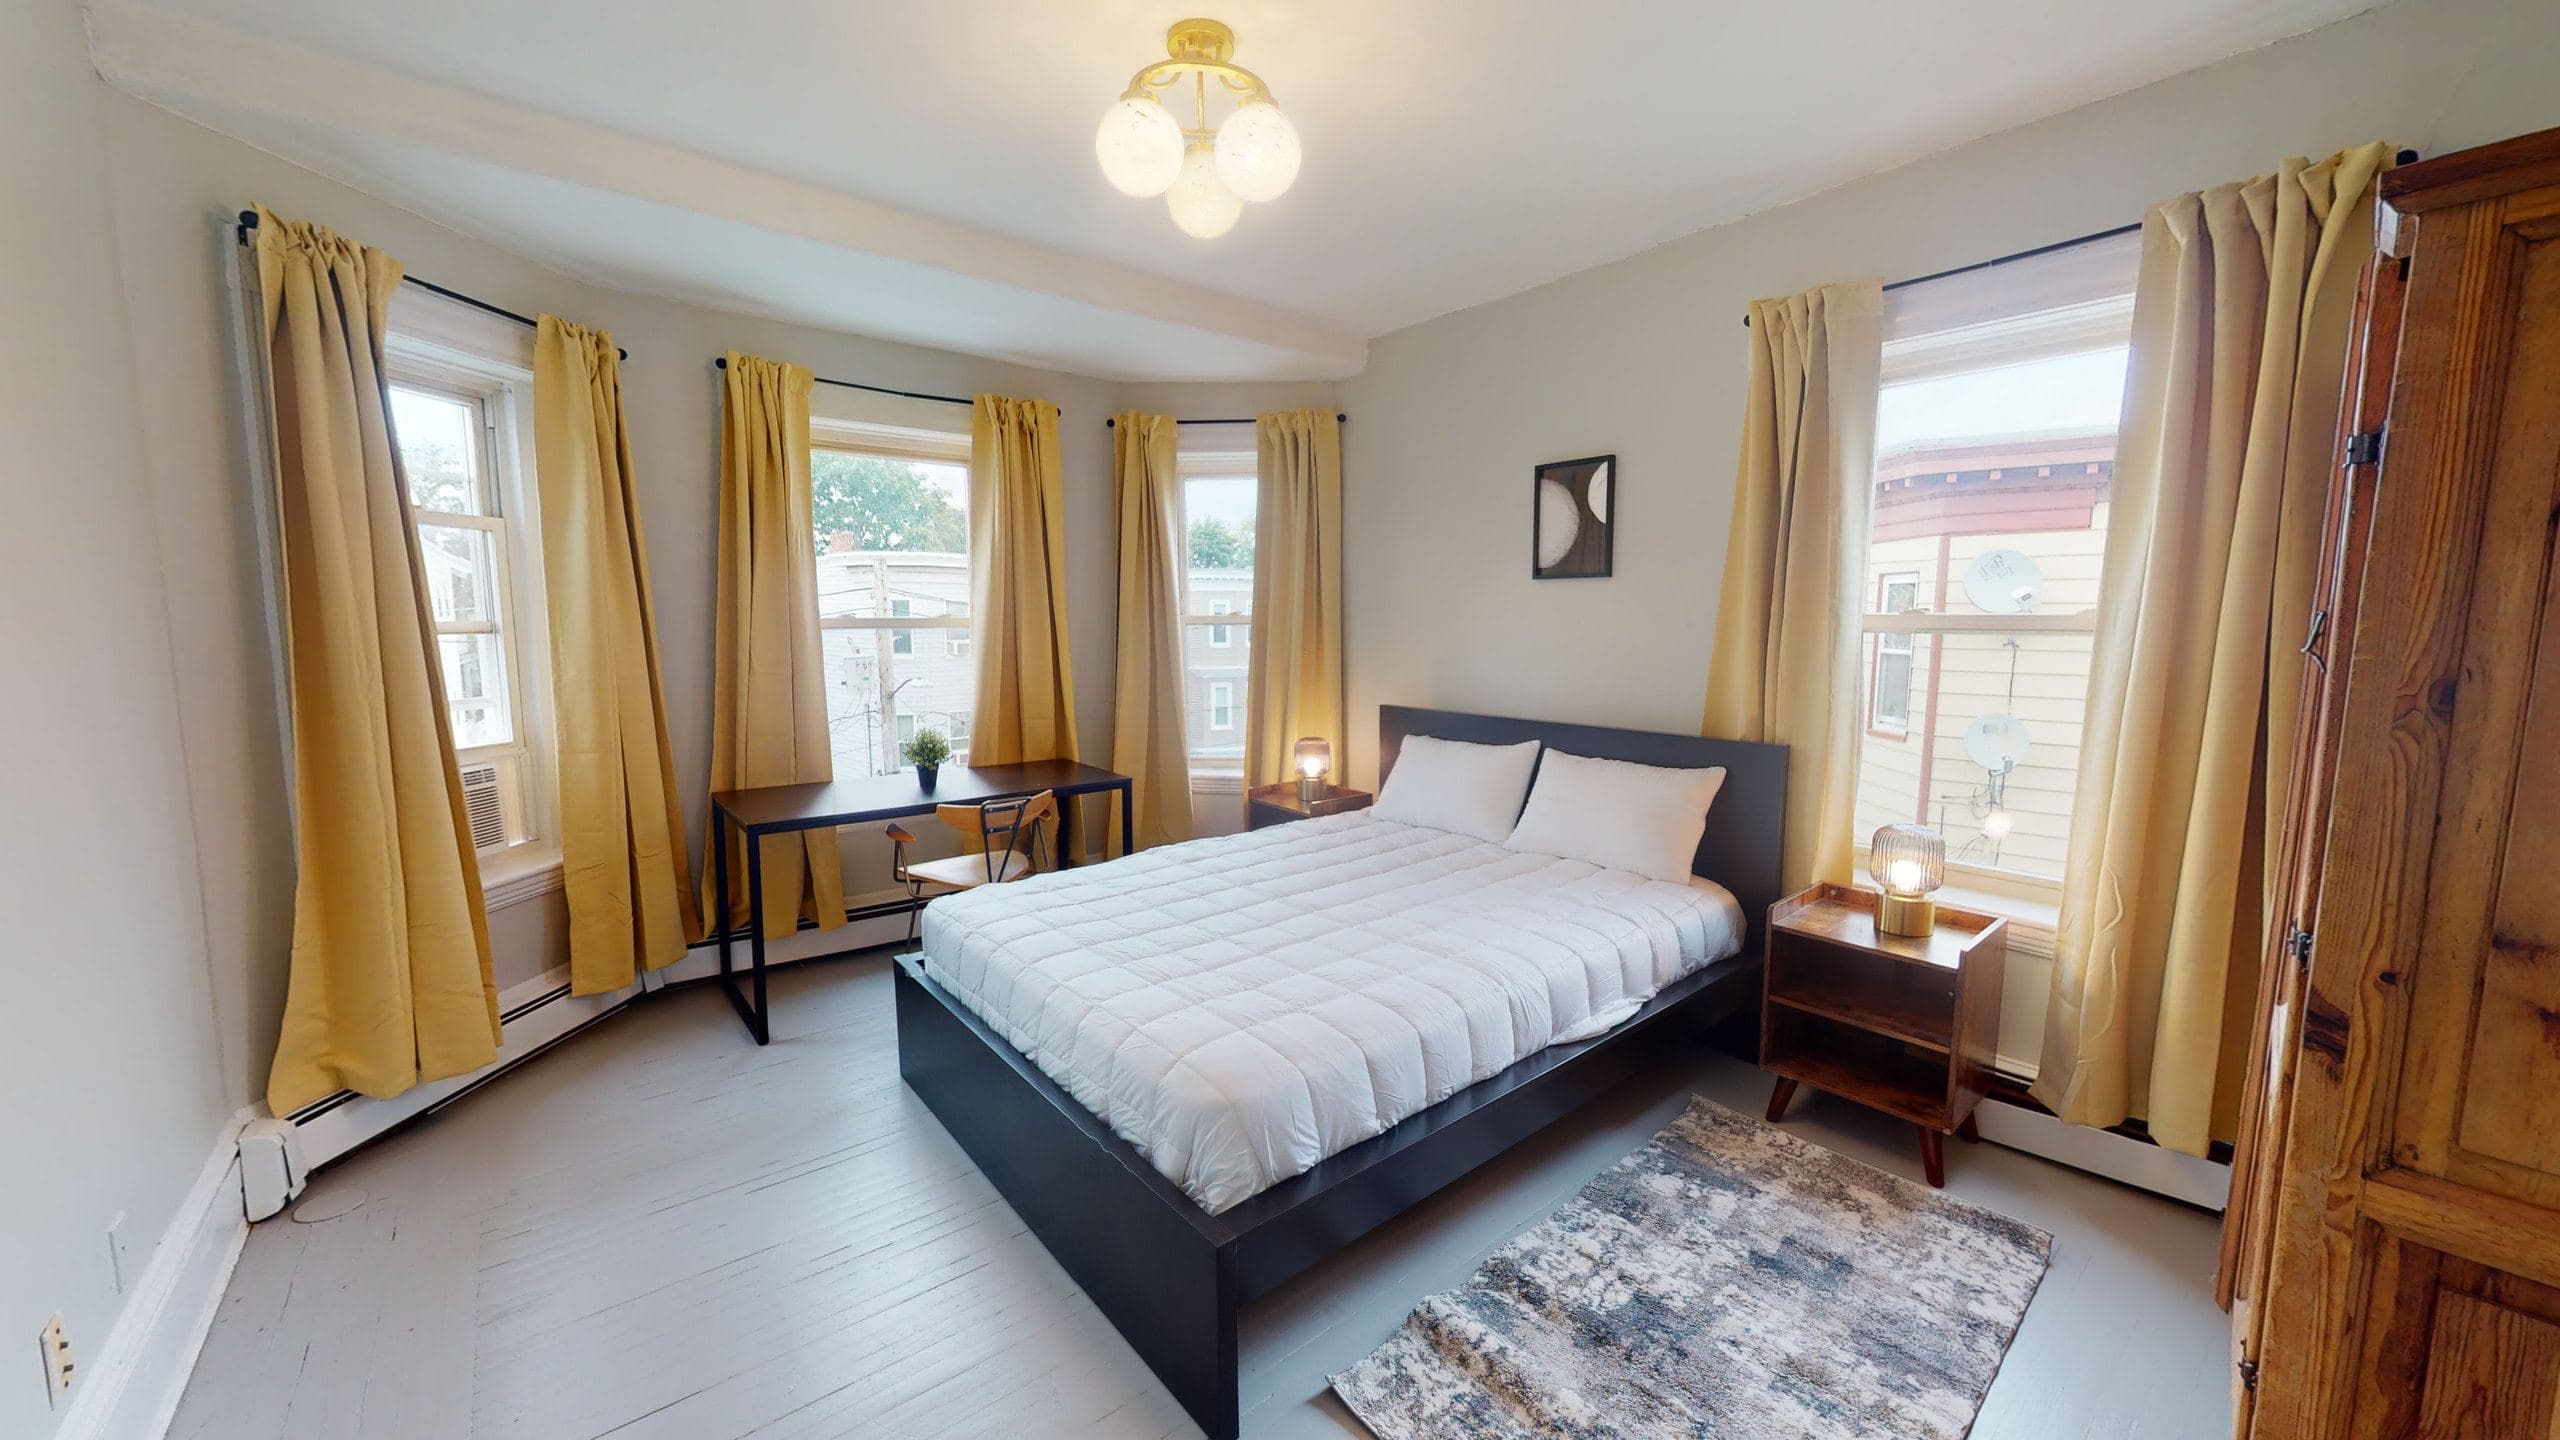 Photo 1 of #1359: Queen Bedroom A at June Homes